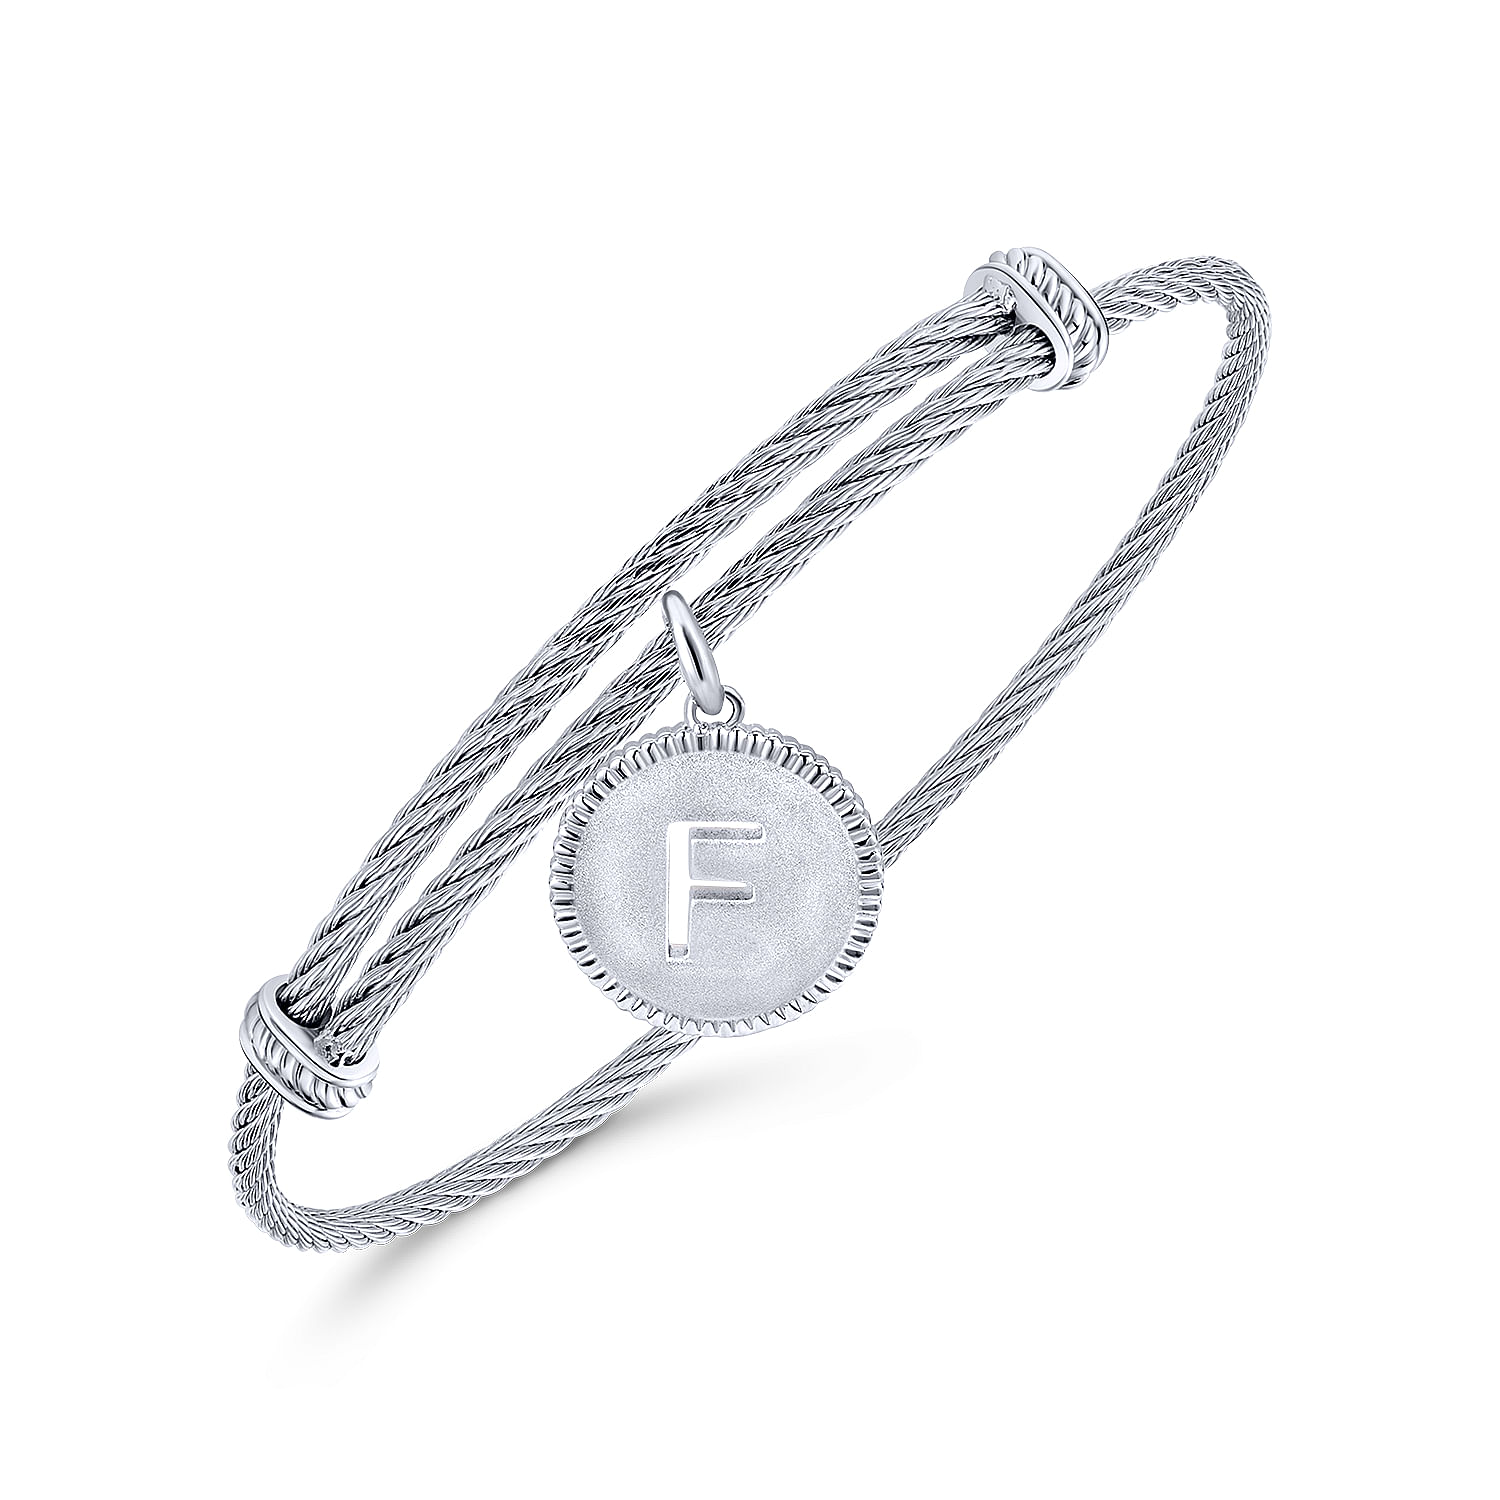 Adjustable Twisted Cable Stainless Steel Bangle with Sterling Silver F Initial Charm